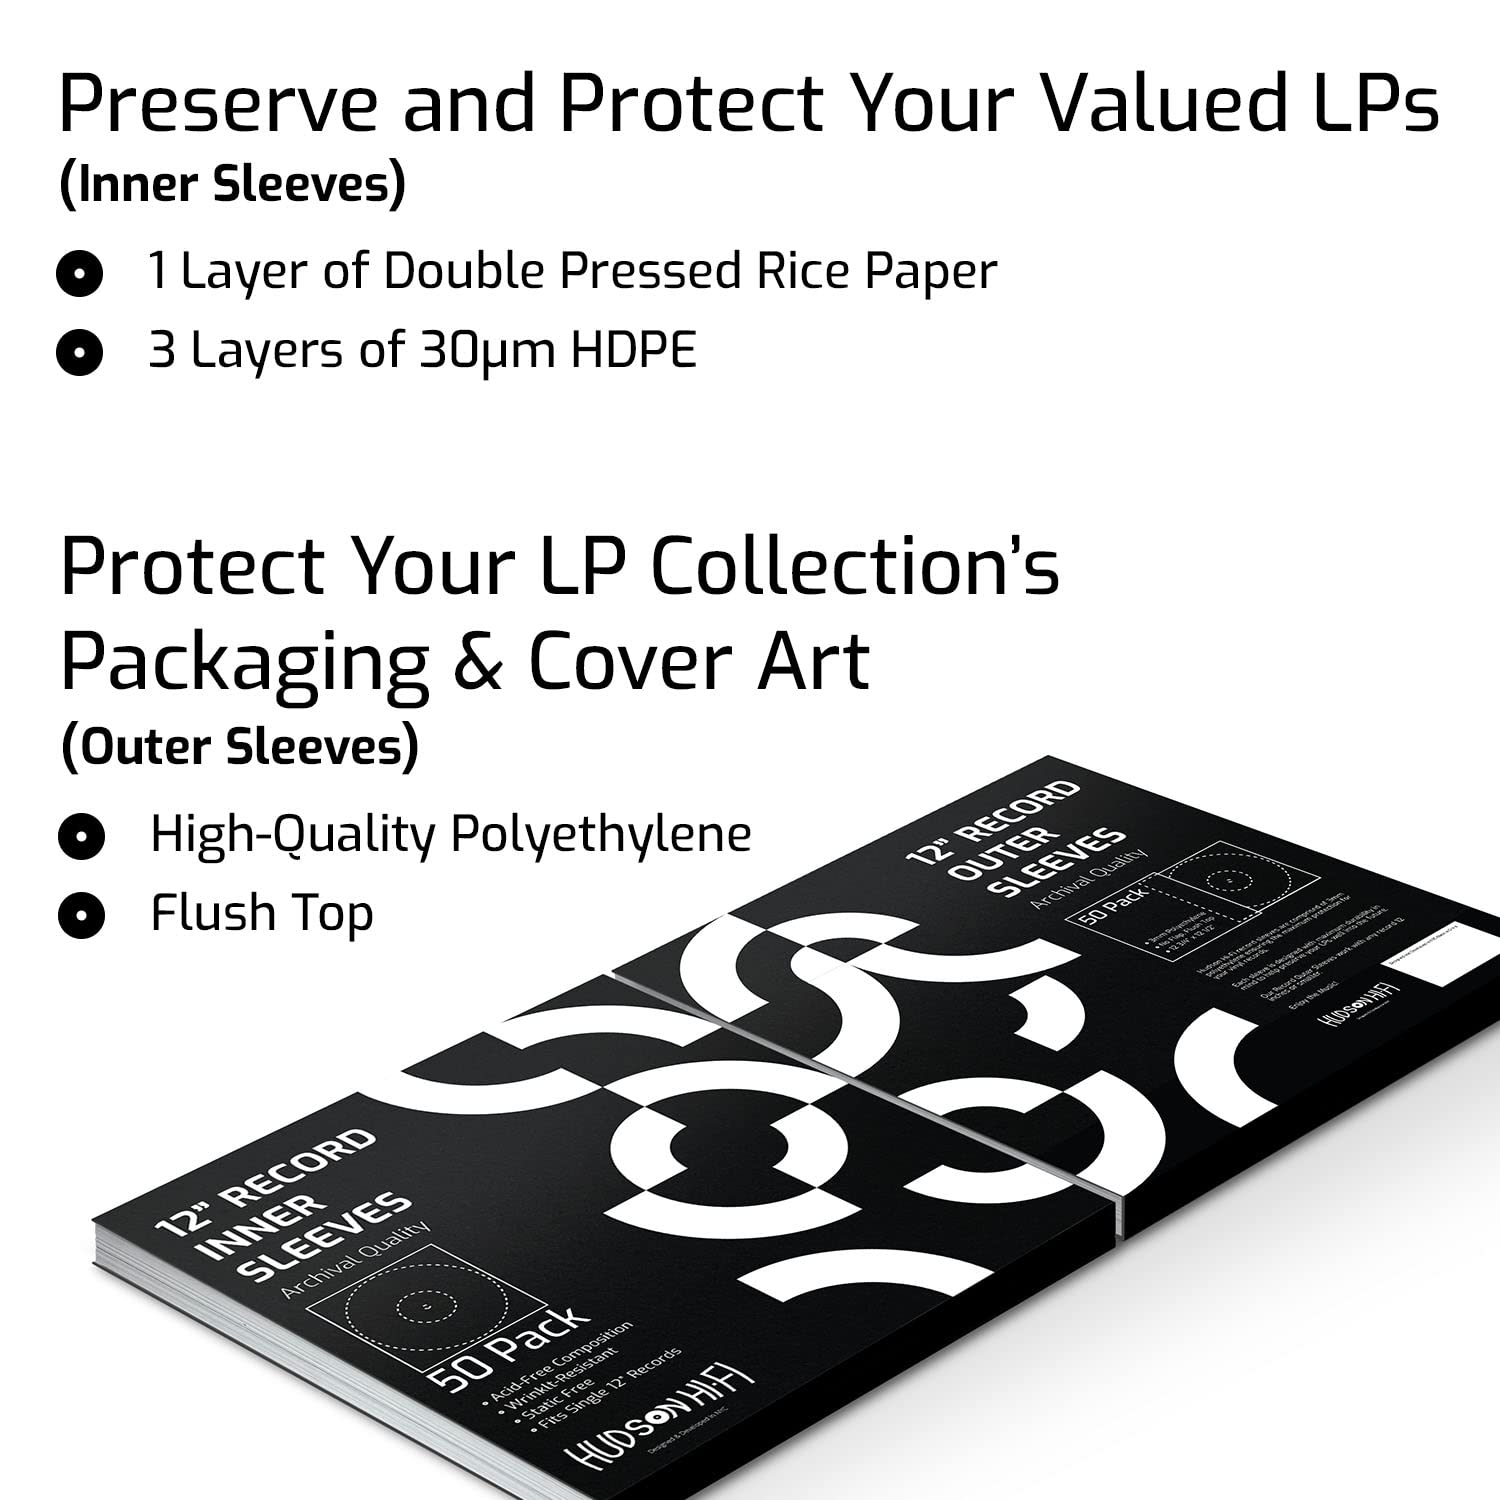 Hudson Hi-Fi Vinyl Record Outer Sleeves Covers - Premium Clear Vinyl Record Sleeve 500-Pack - Protect Your LP Albums from Scratches, Dirt & Dust - 3mm